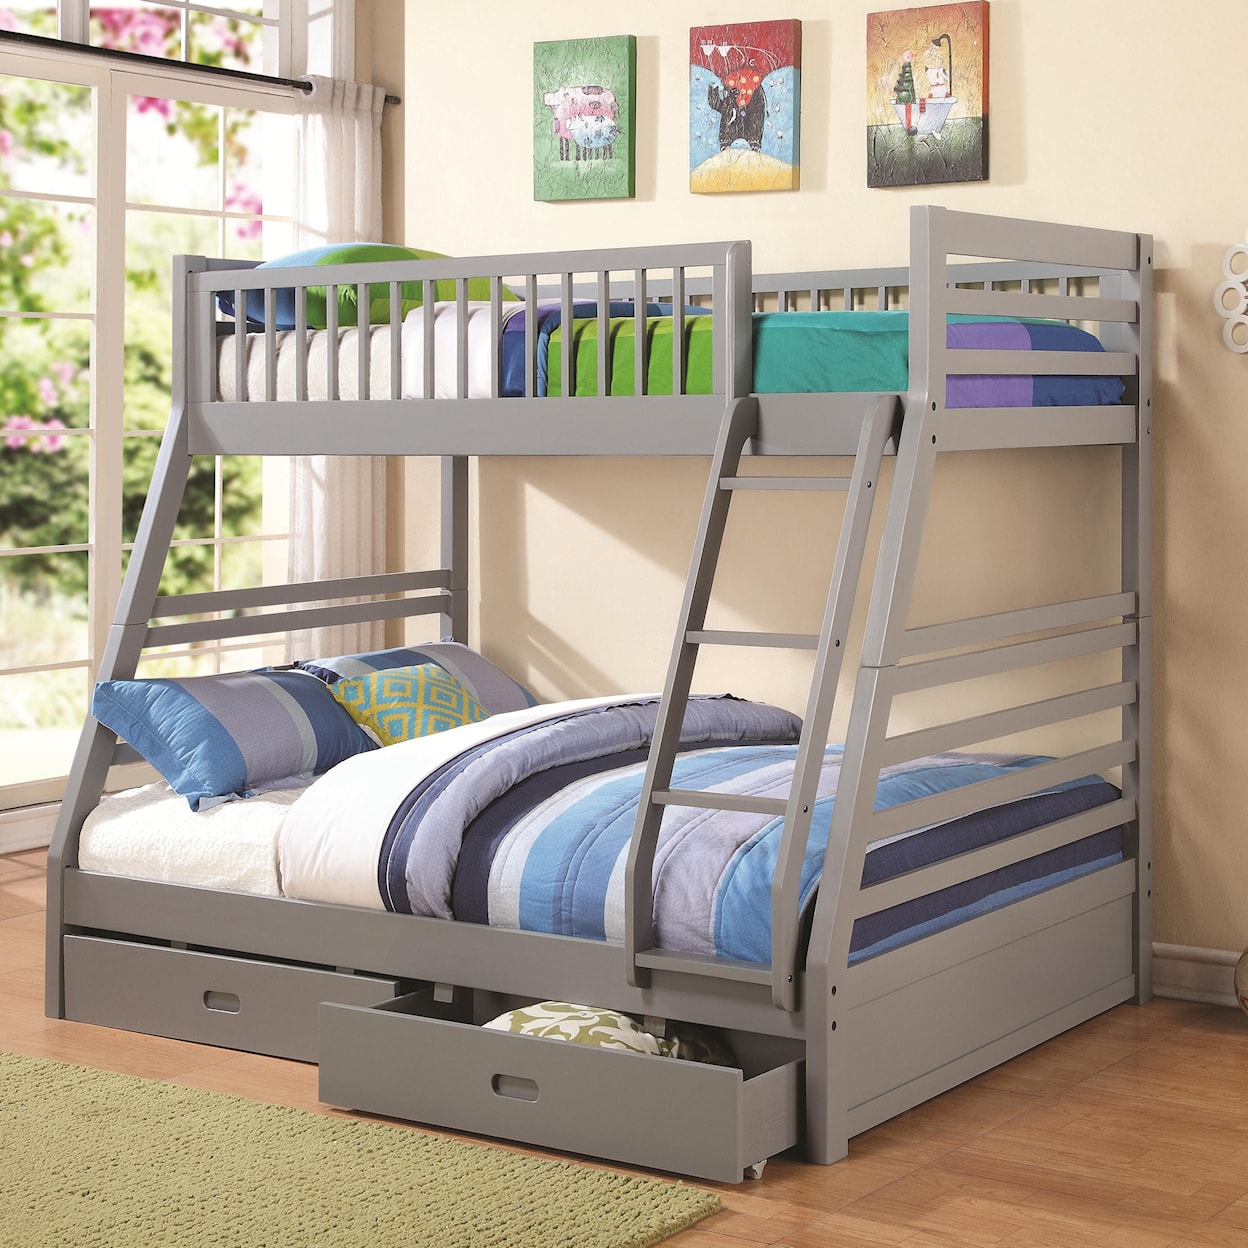 Coaster Bunks Twin over Full Bunk Bed